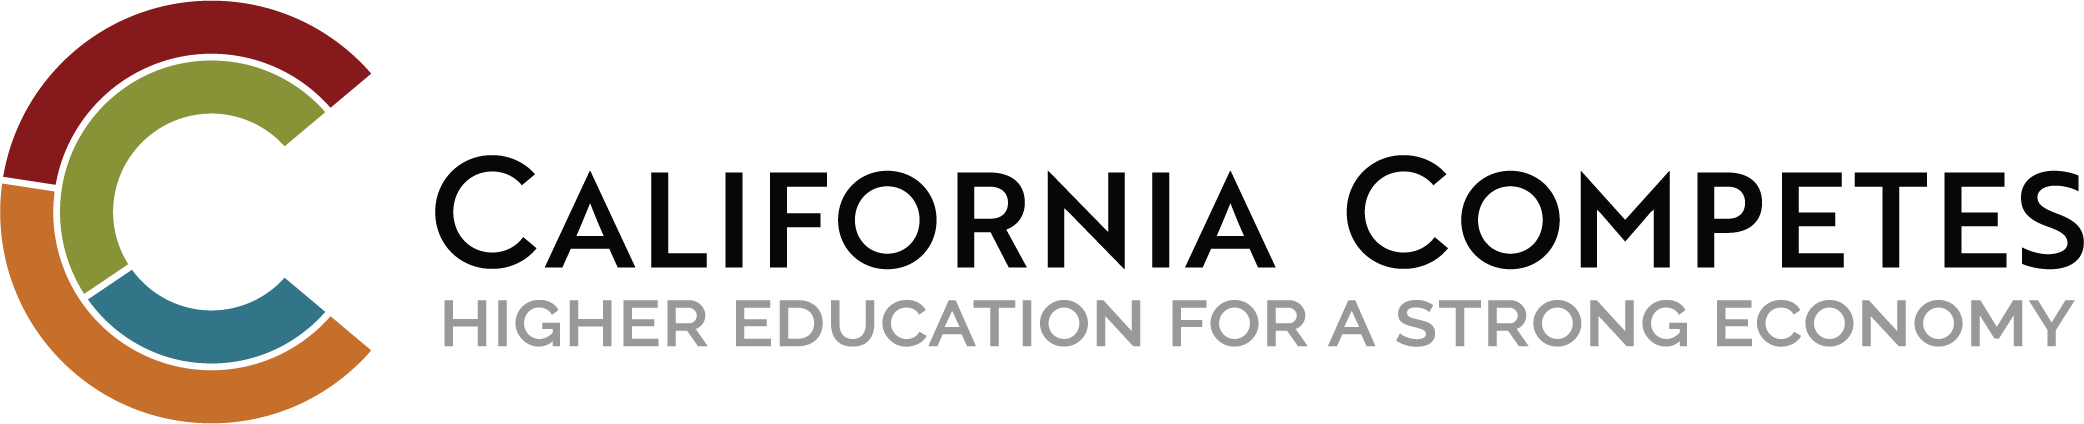 California Competes - Higher Education for a Strong Economy - logo